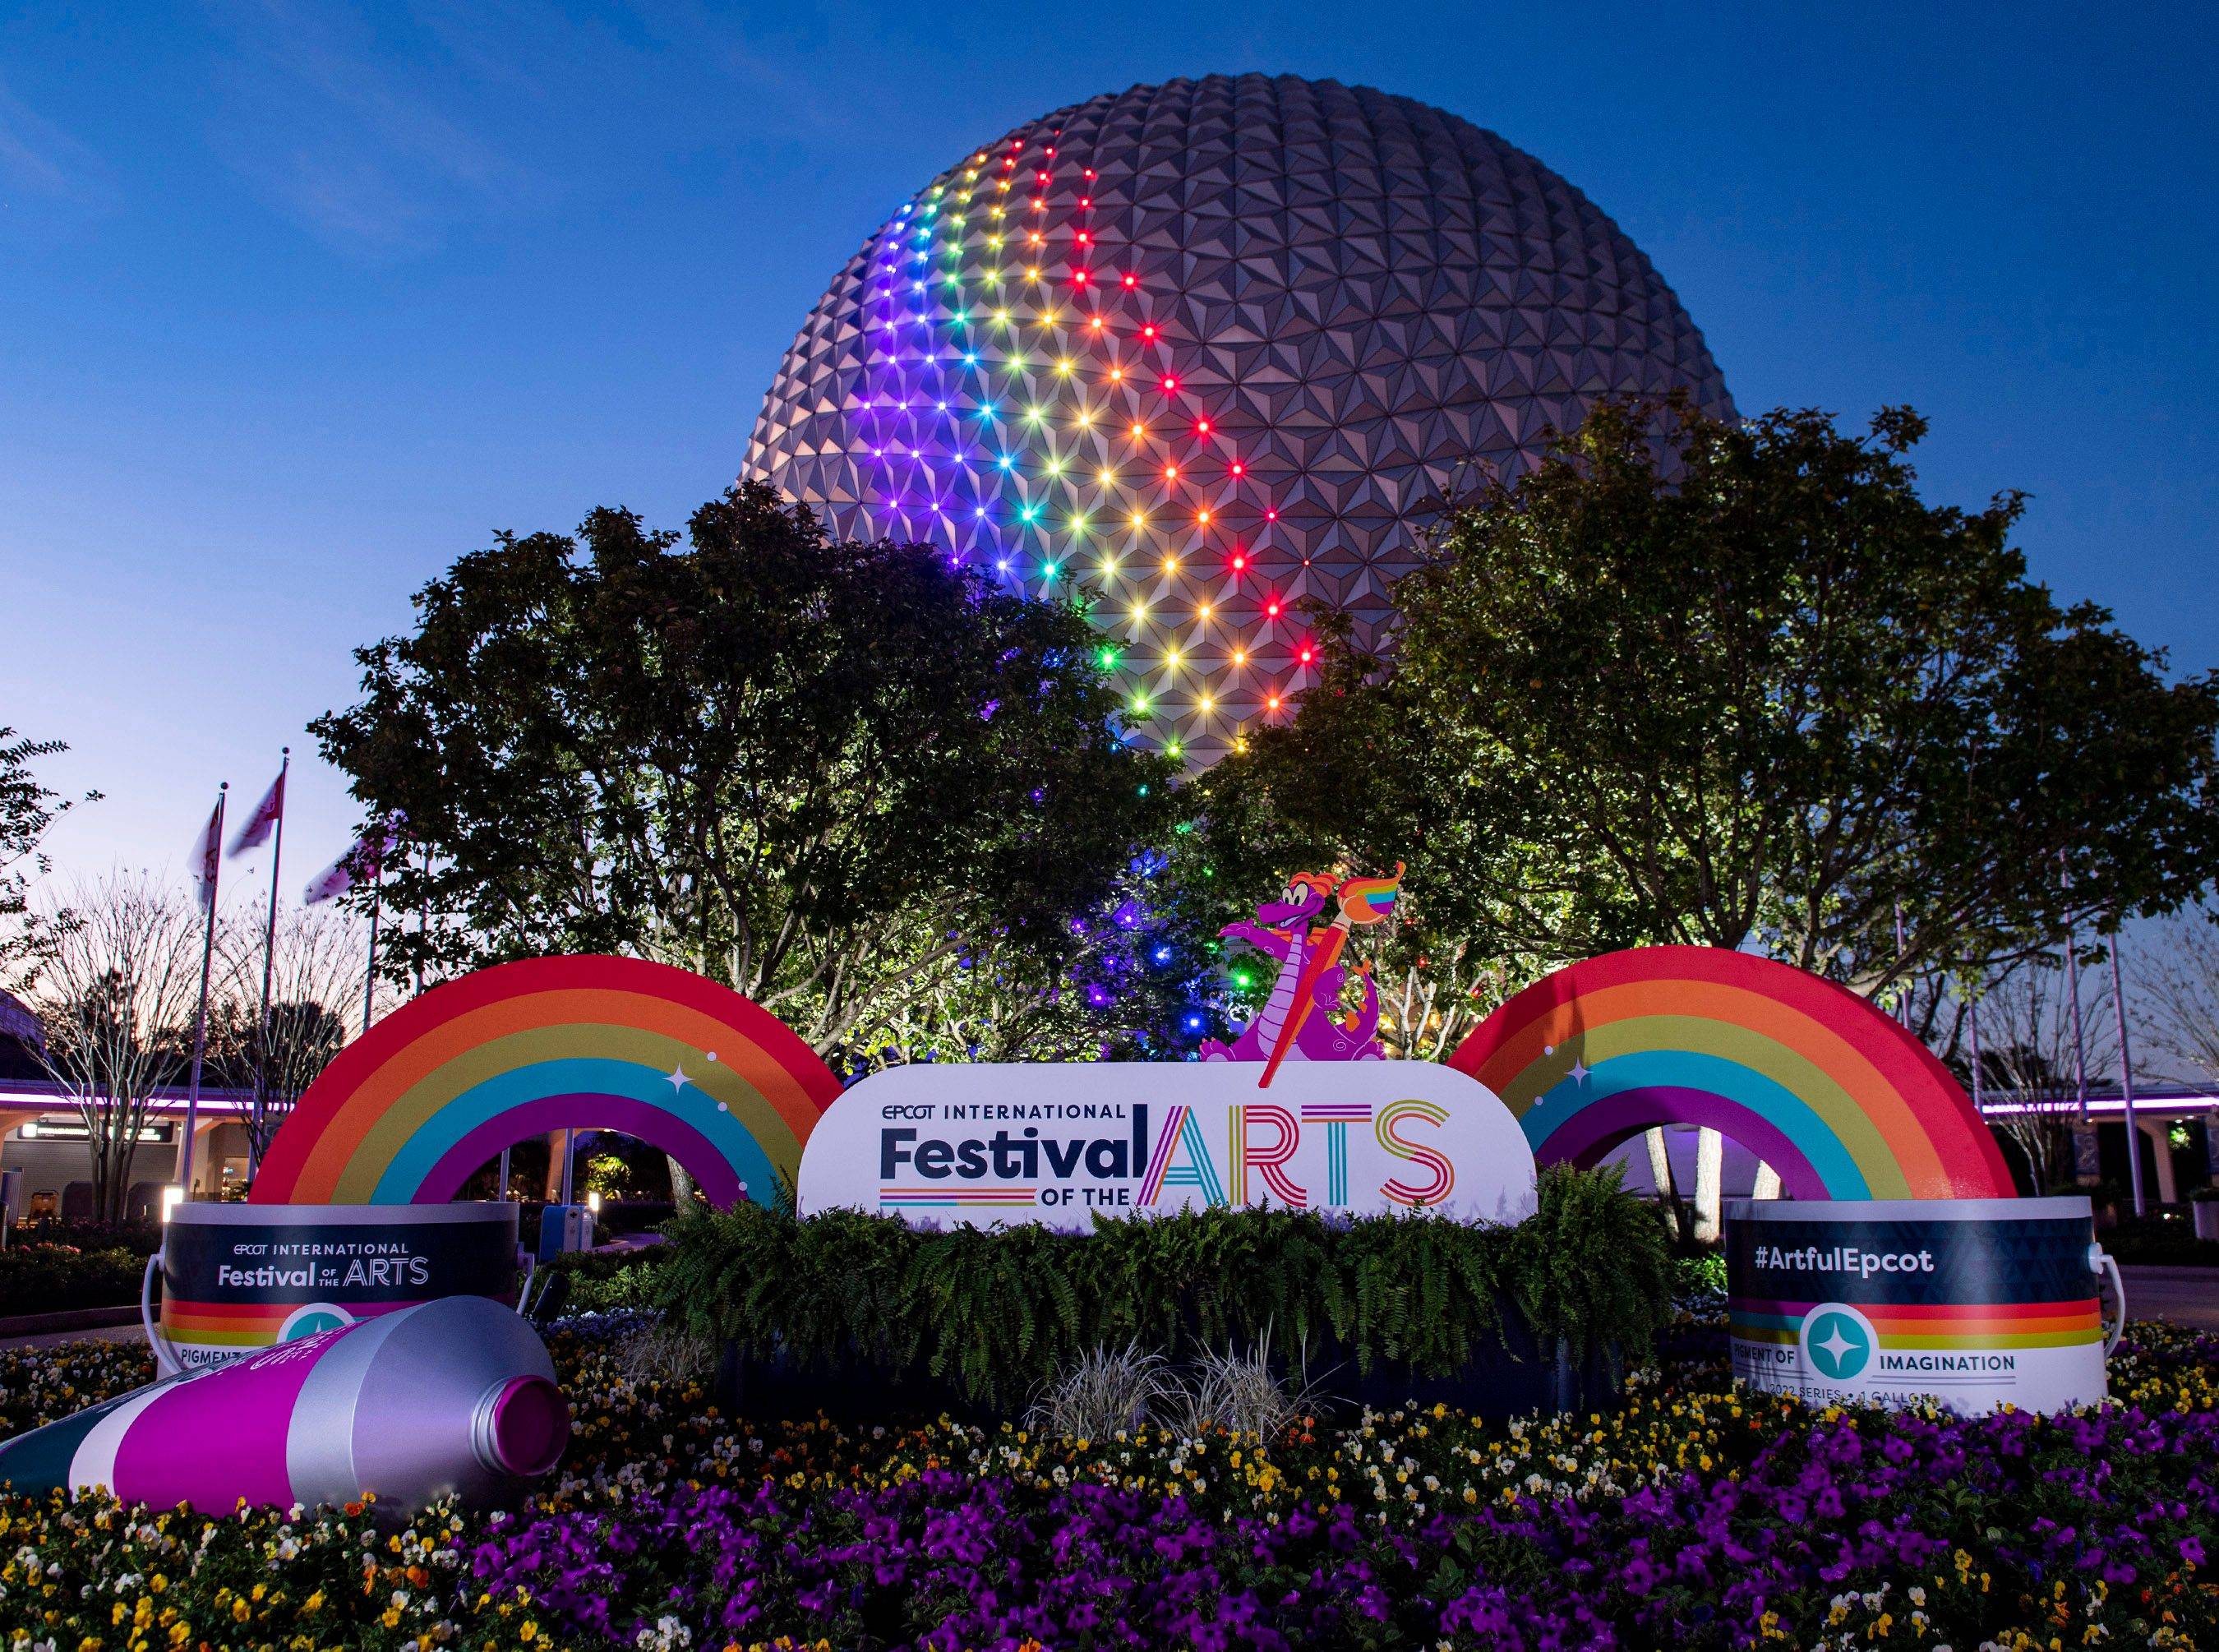 Spaceship Earth joins the EPCOT International Festival of the Arts with a  new lighting design and The Muppets singing 'Rainbow Connection'